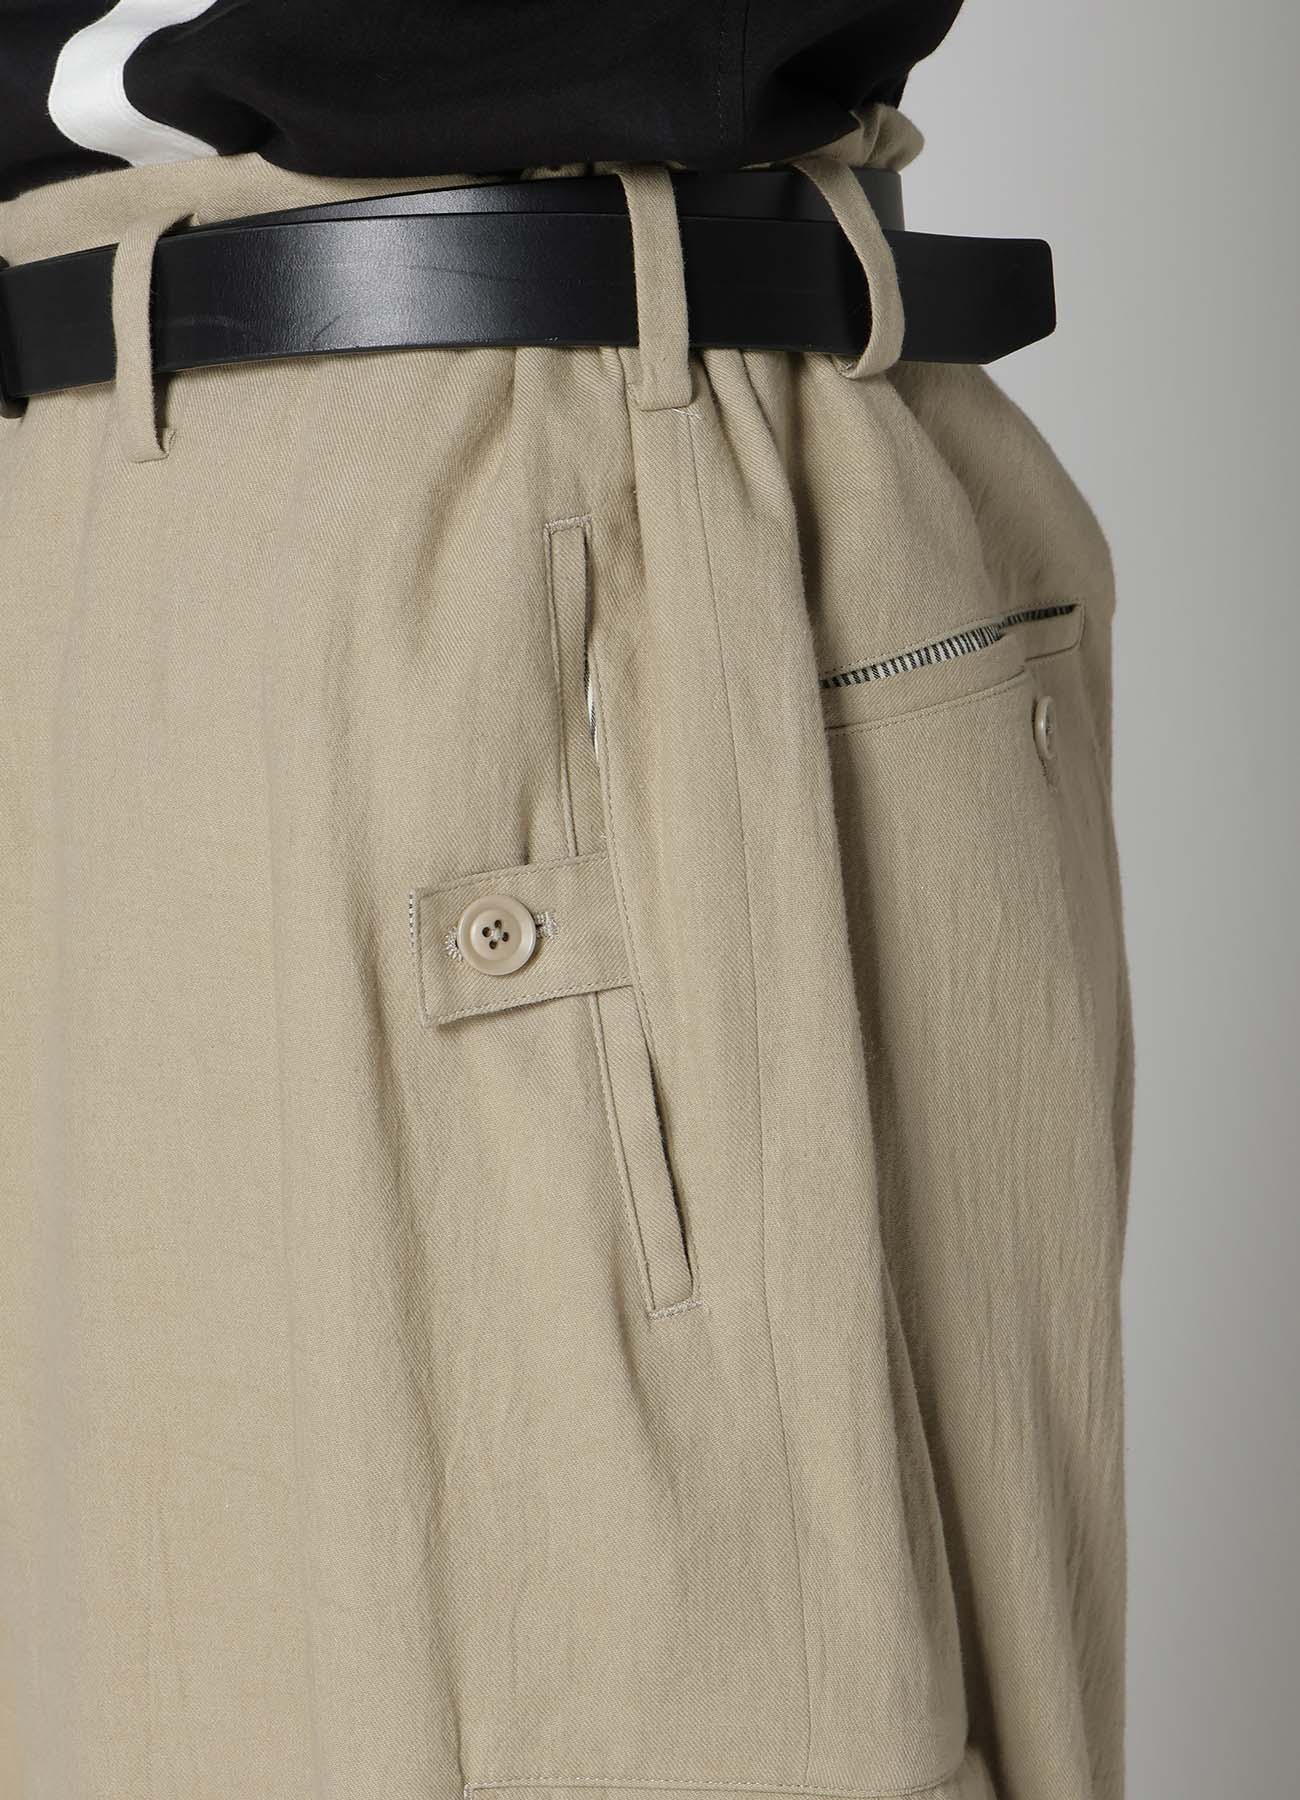 COTTON LINEN VIYELLA WIDE PANTS WITH TAB